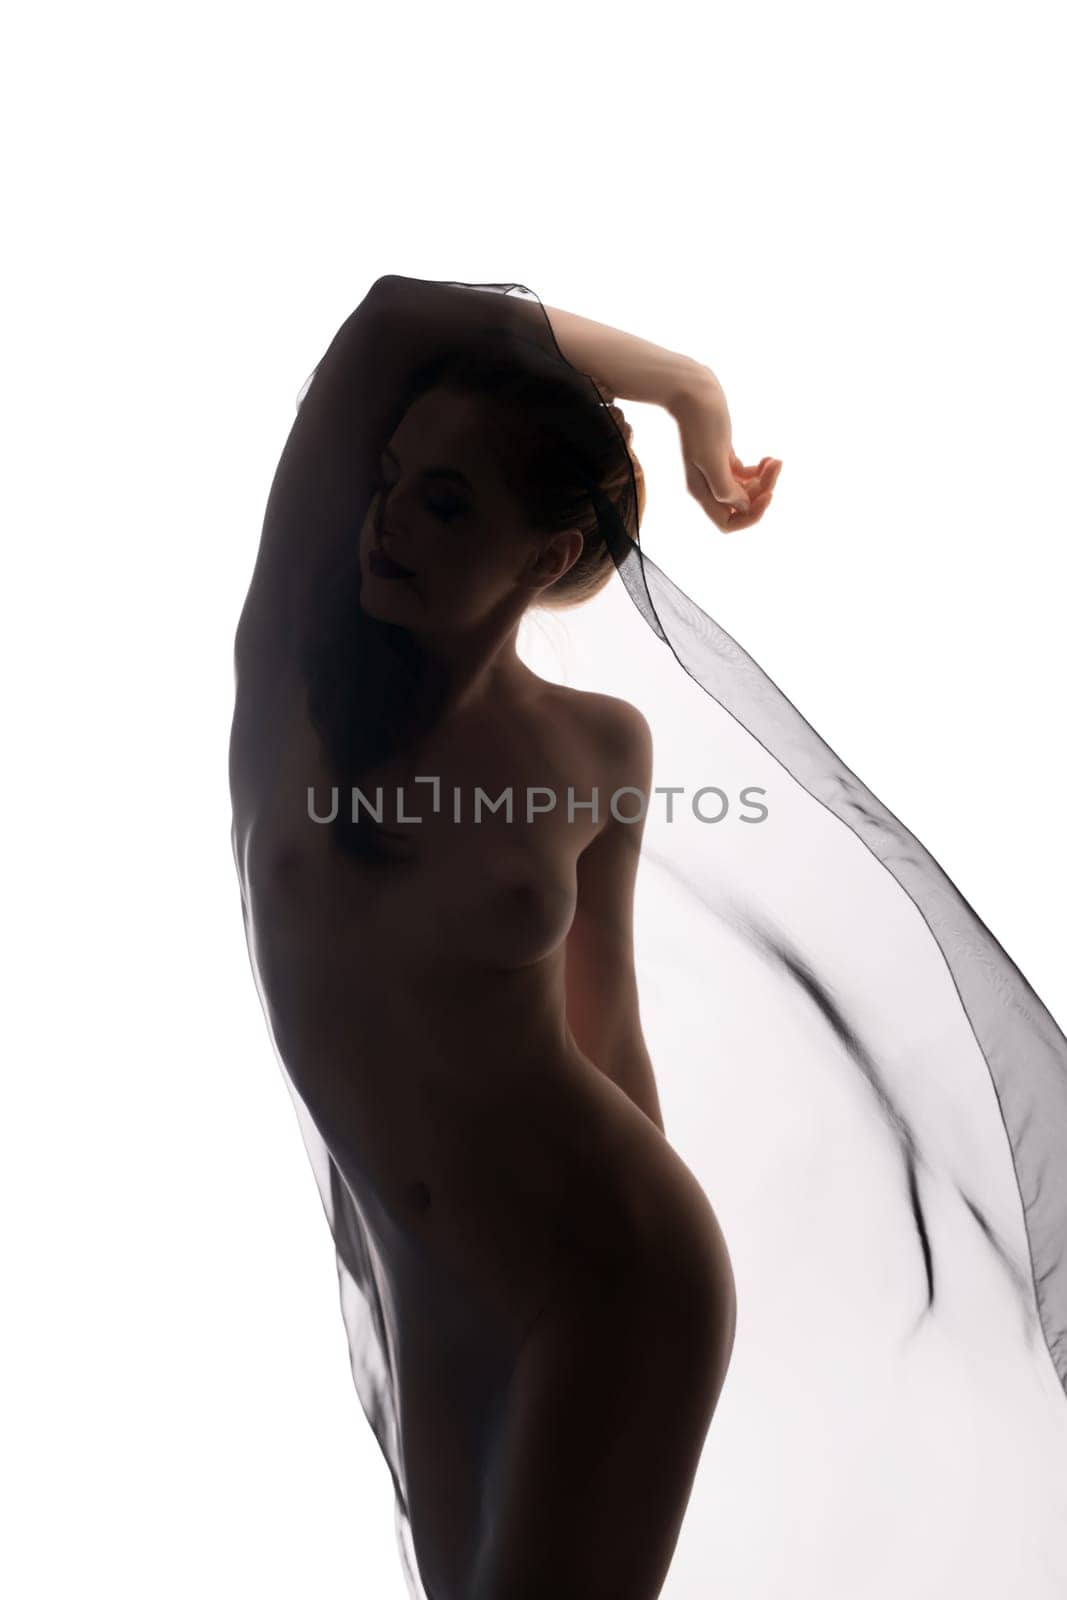 Graceful naked woman dancing with transparent cloth. Isolated on white background